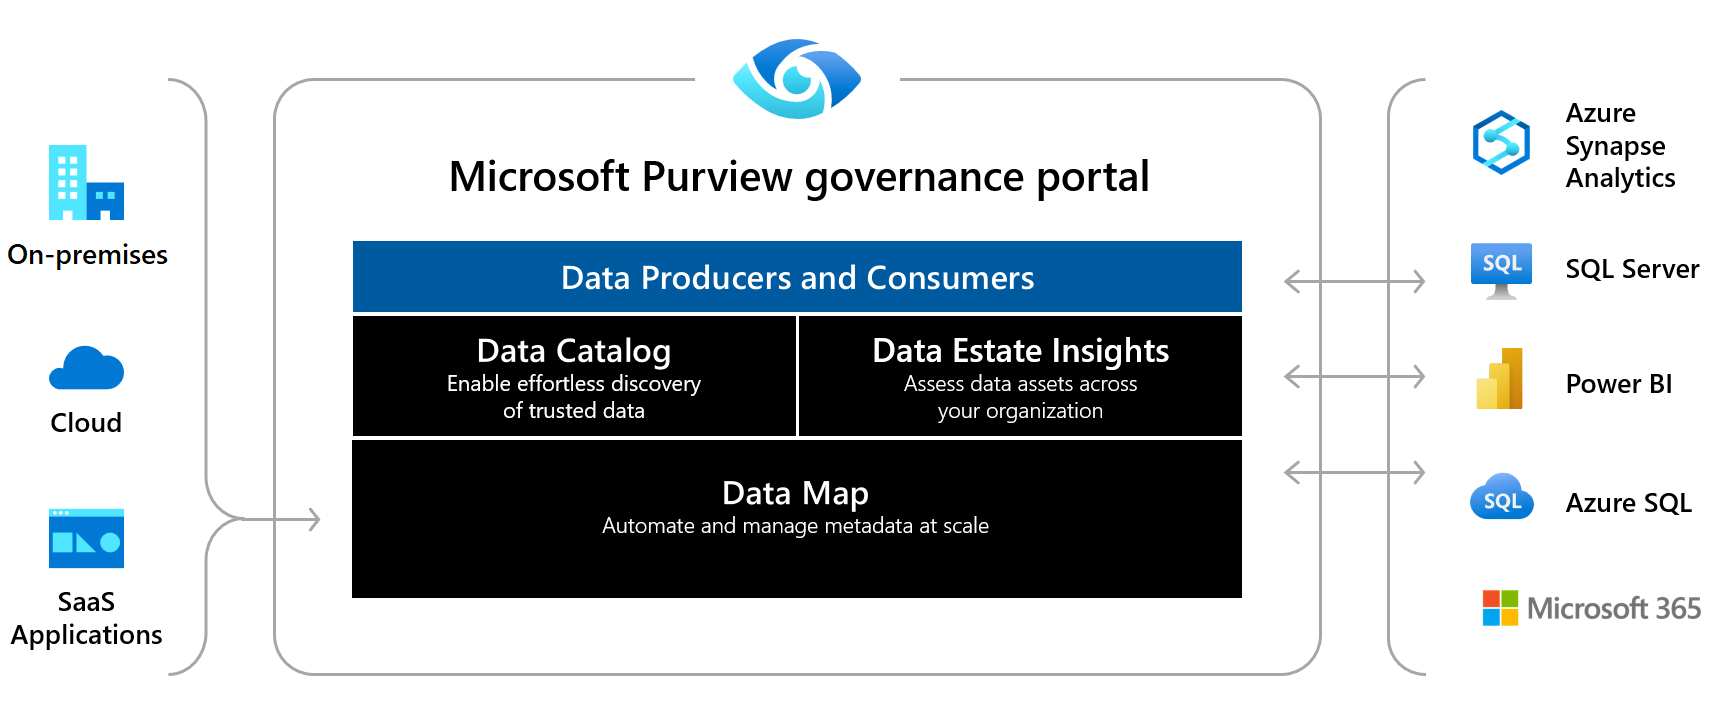 Diagram showing the Microsoft Purview governance portal architecture.